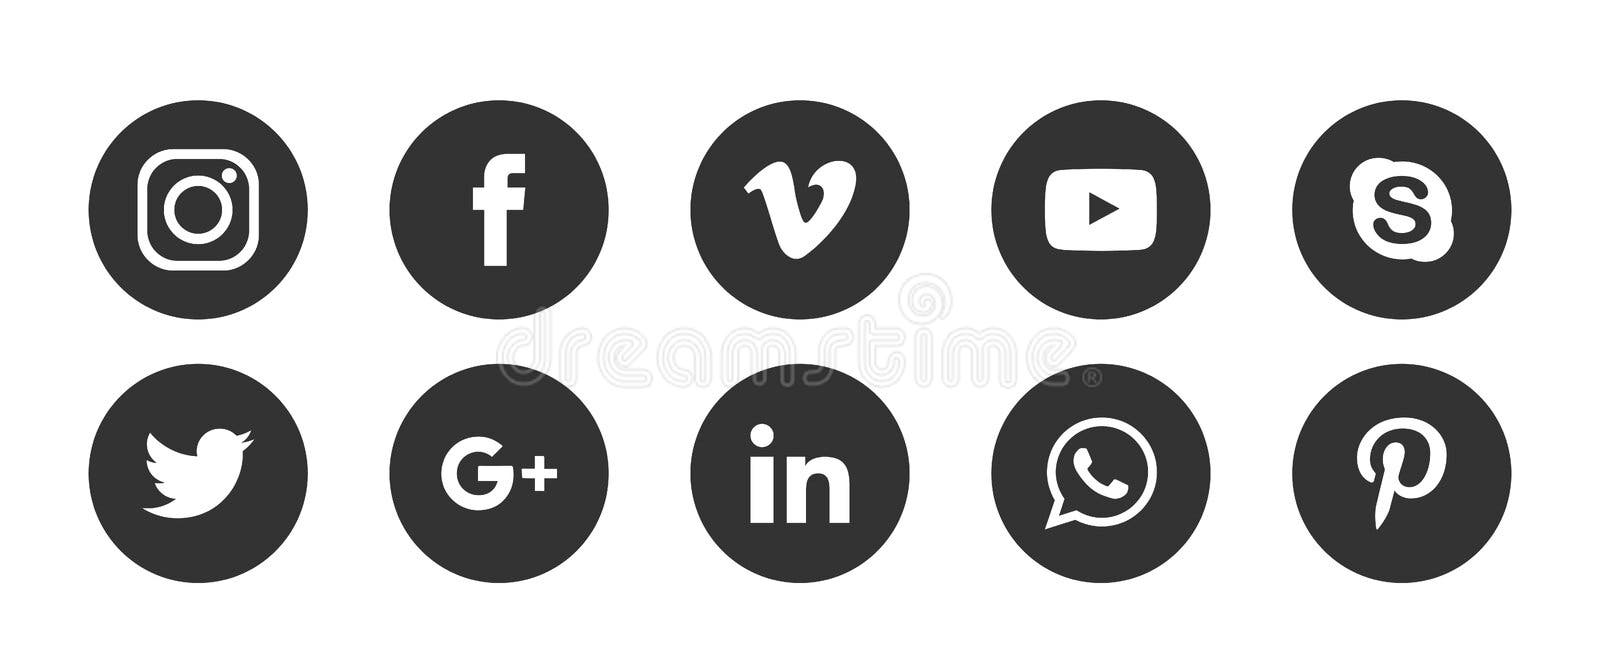 Collection of Social Media Icons and Logos Editorial Photography ...